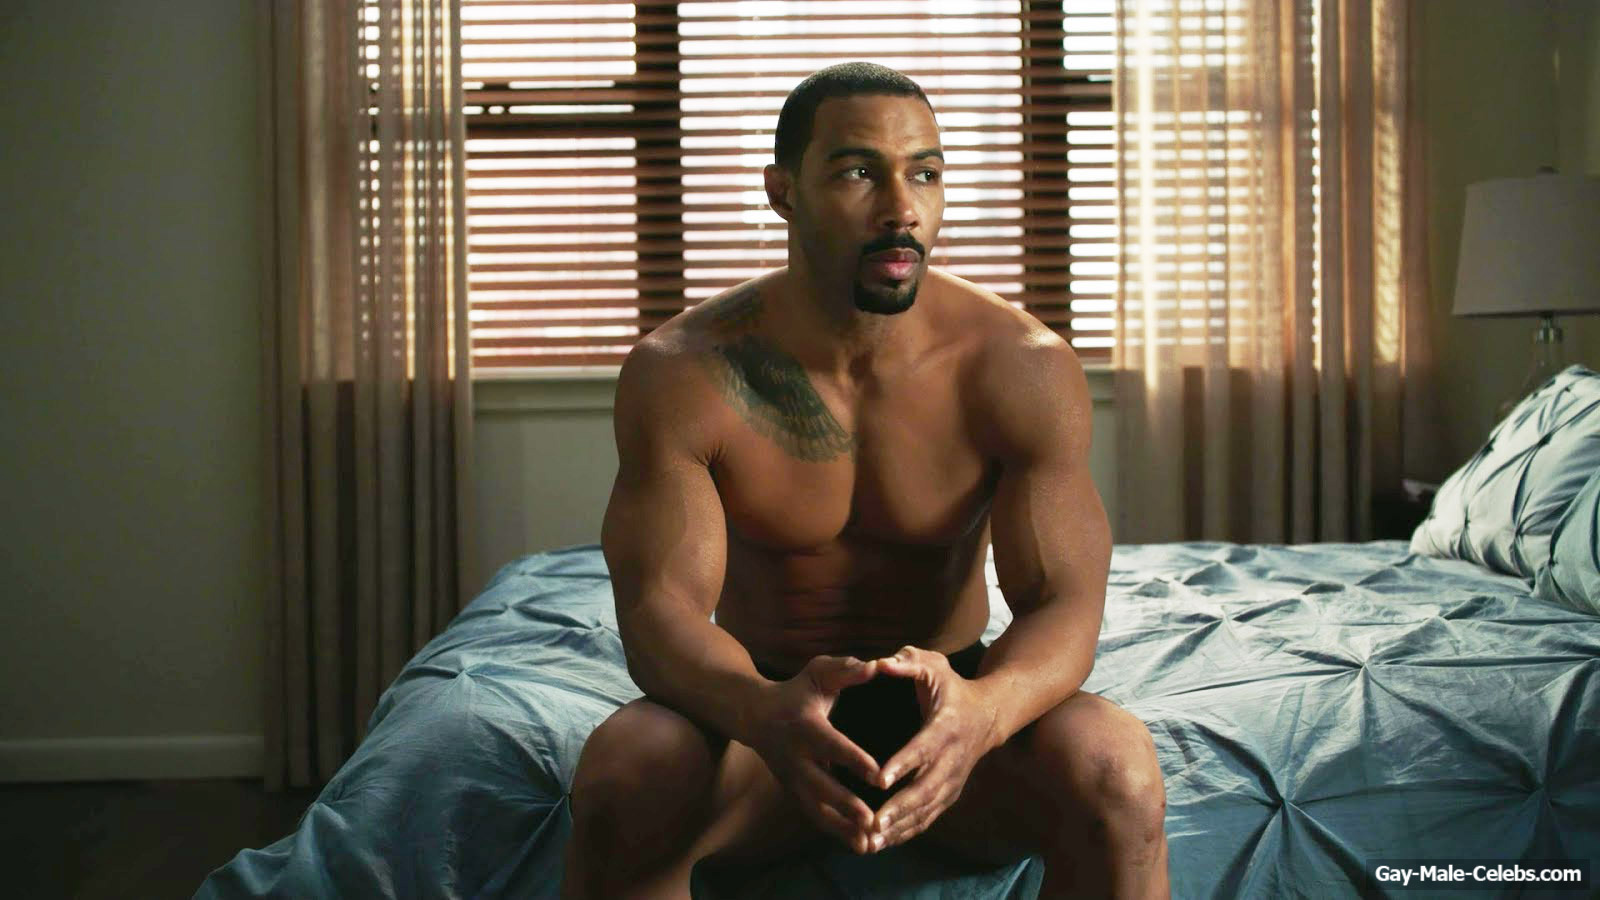 Omari Hardwick nude butt makes you want to spank him right away! 